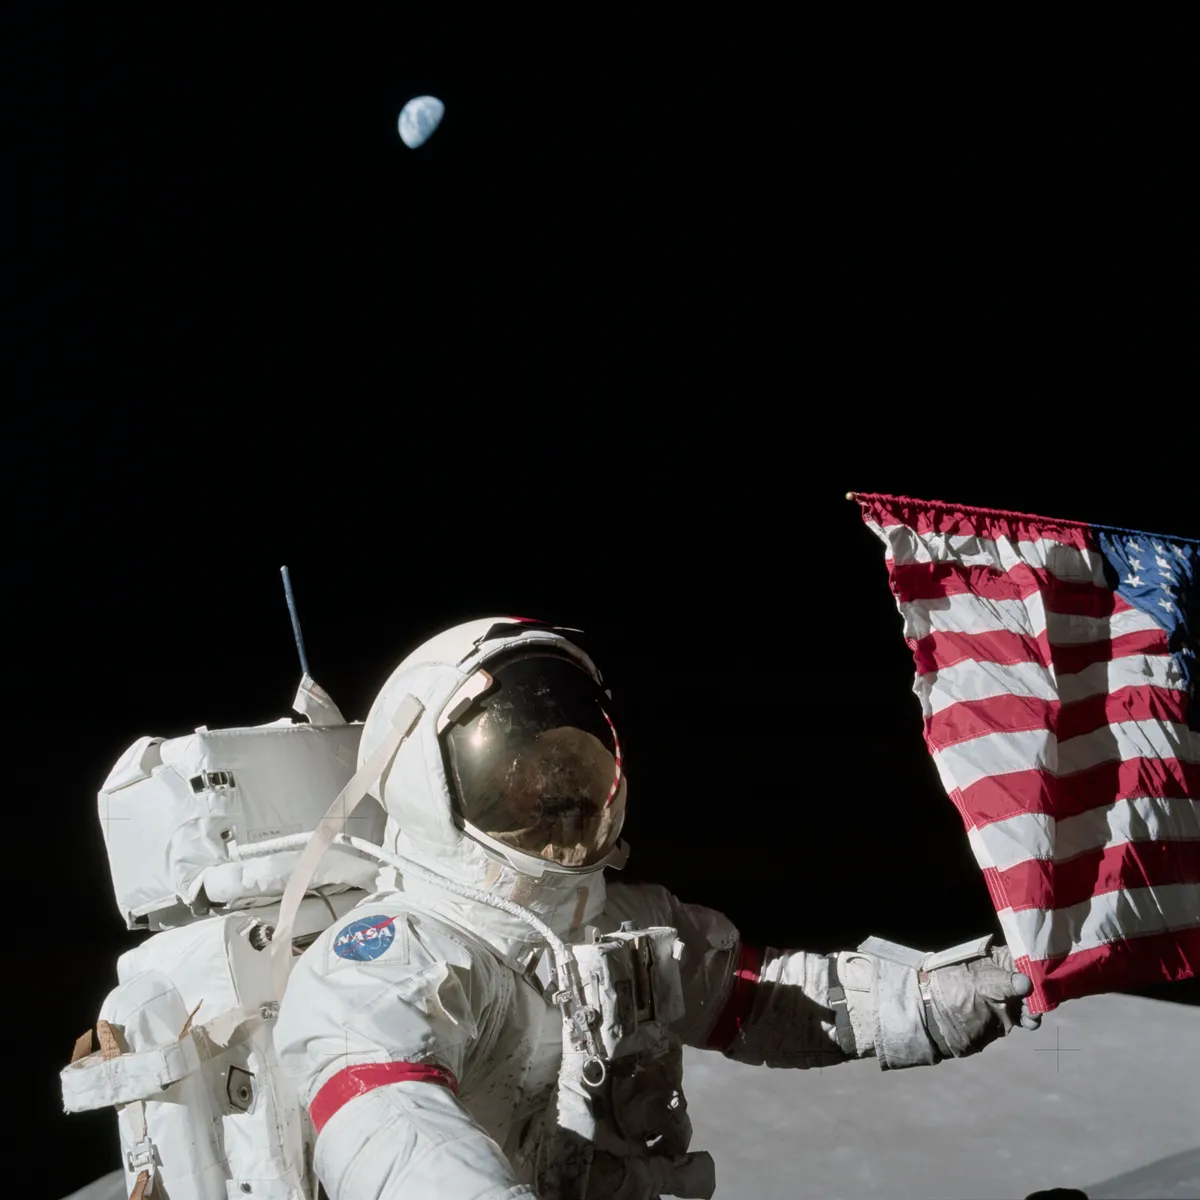 Apollo 17 crew member Eugene Cernan seen during the mission’s first extravehicular activity, 12 December 1972. (NASA)